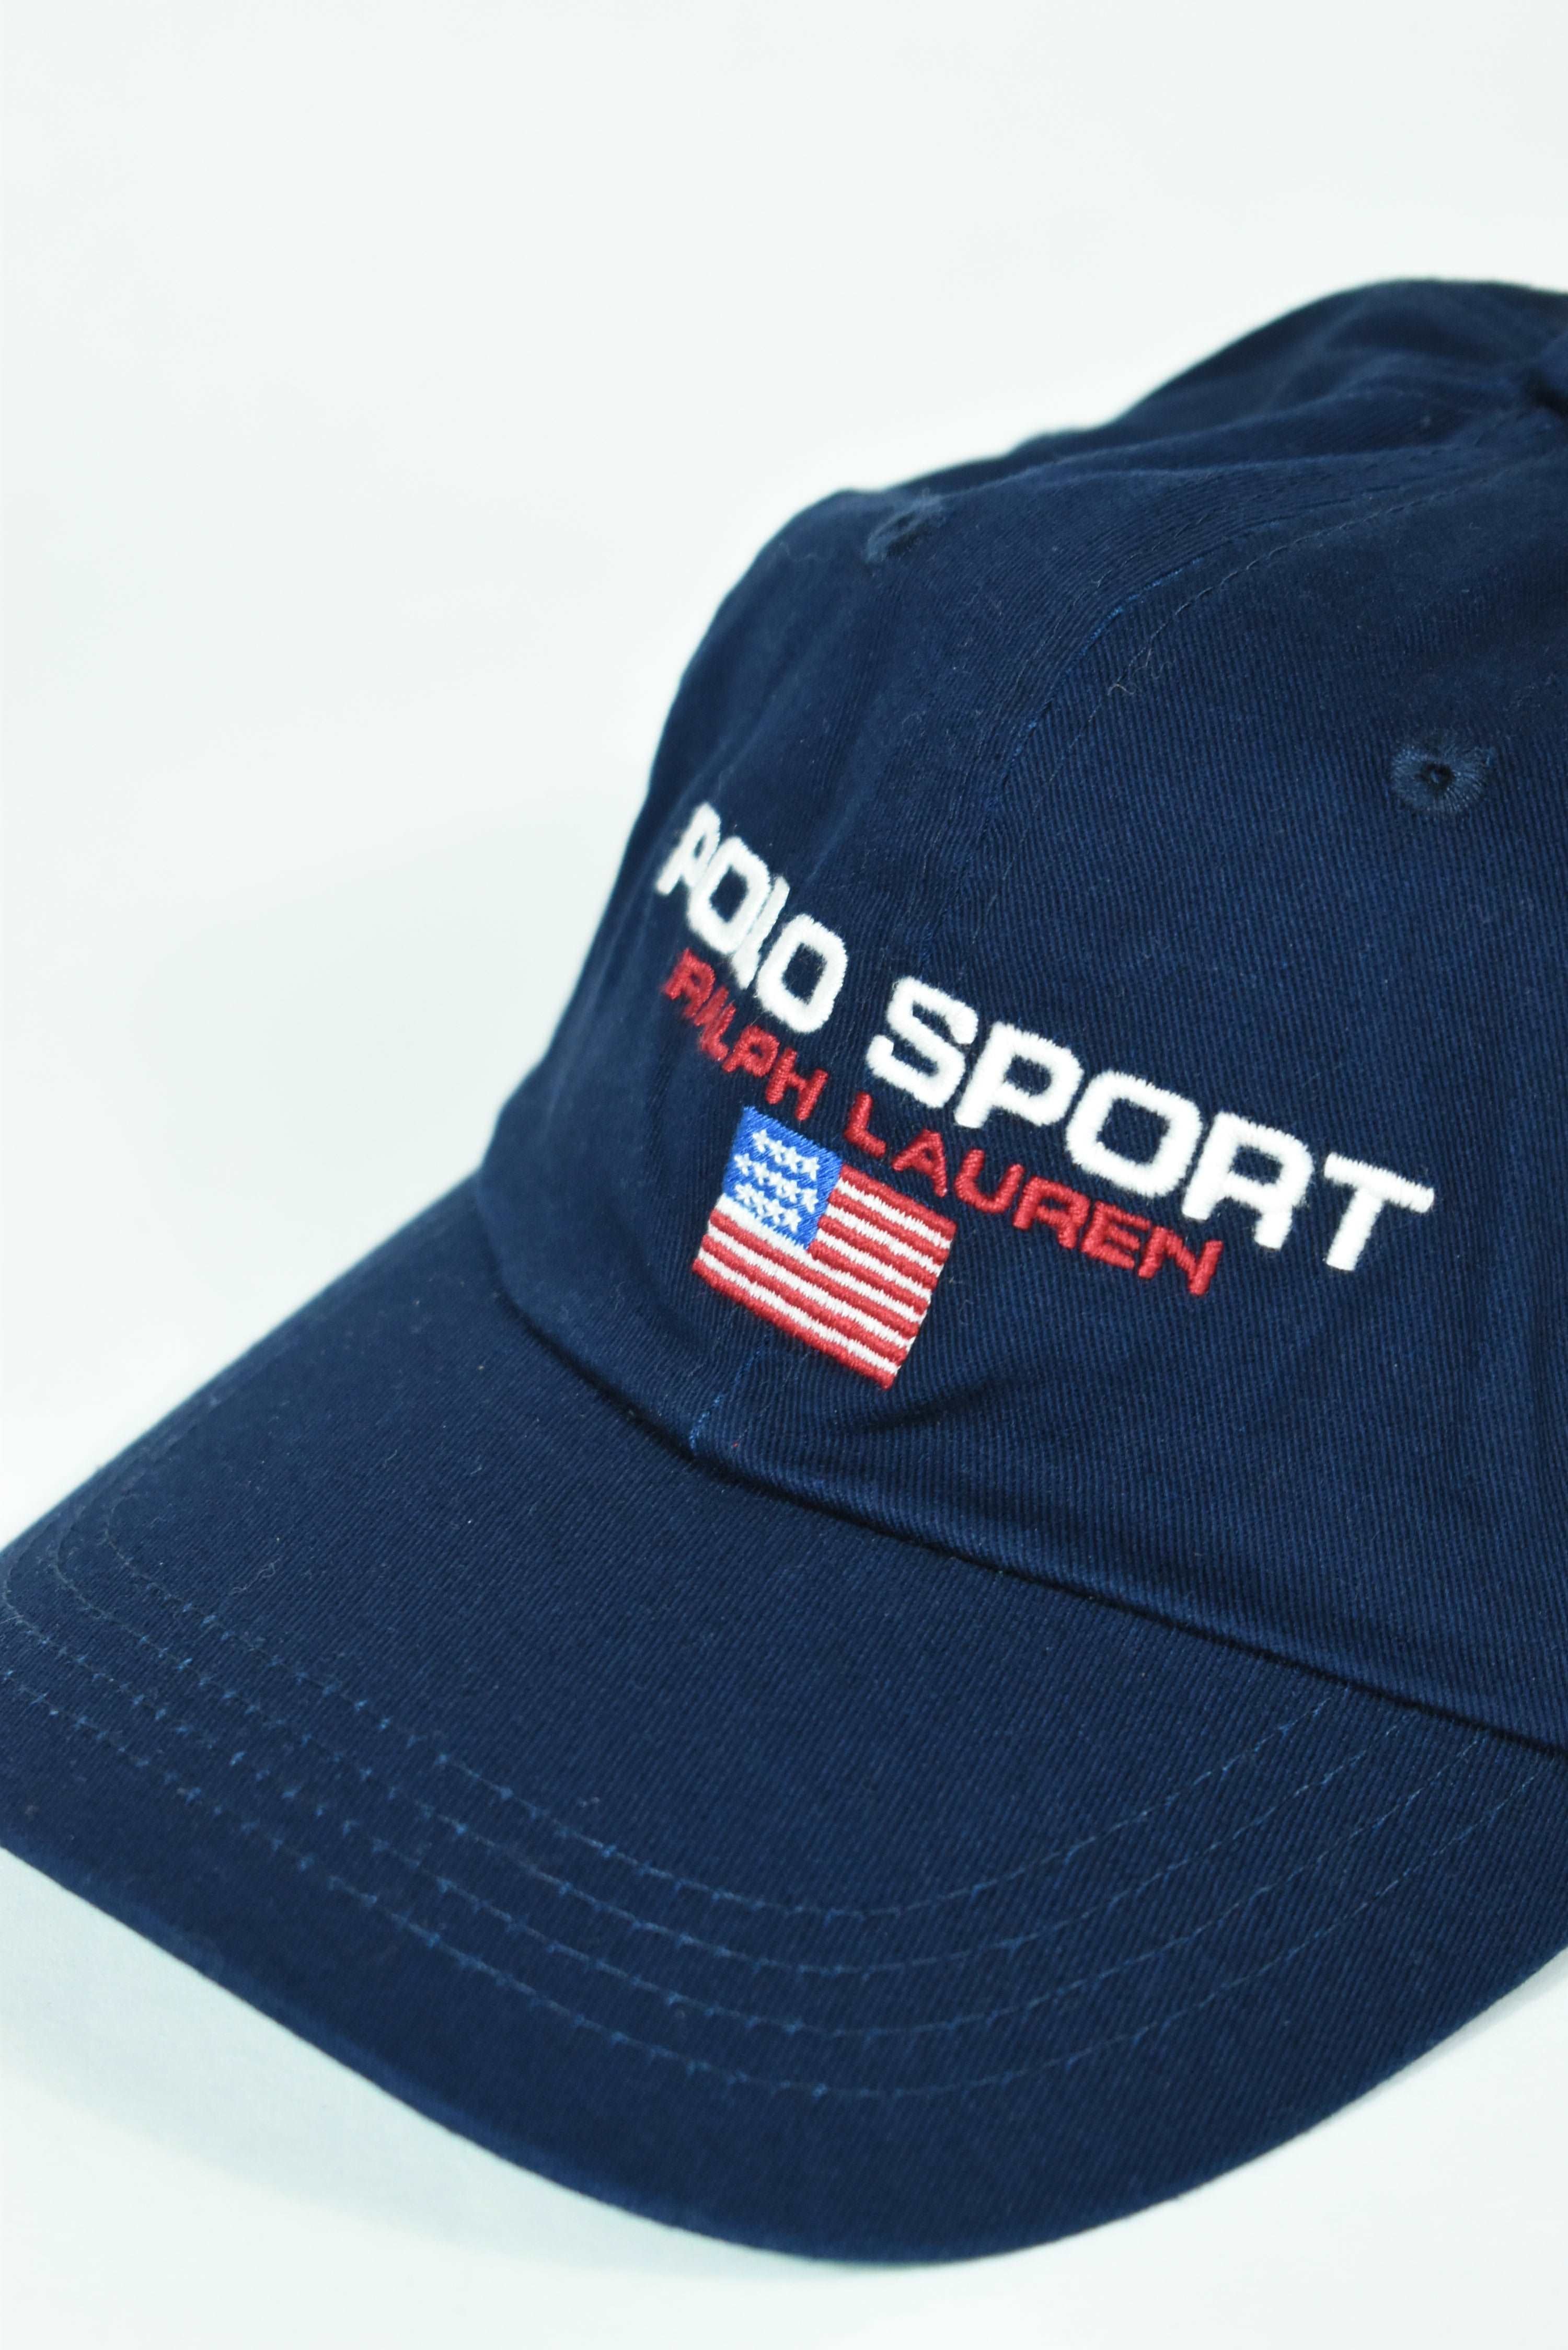 New Navy RL Polo Sport Embroidery Cap